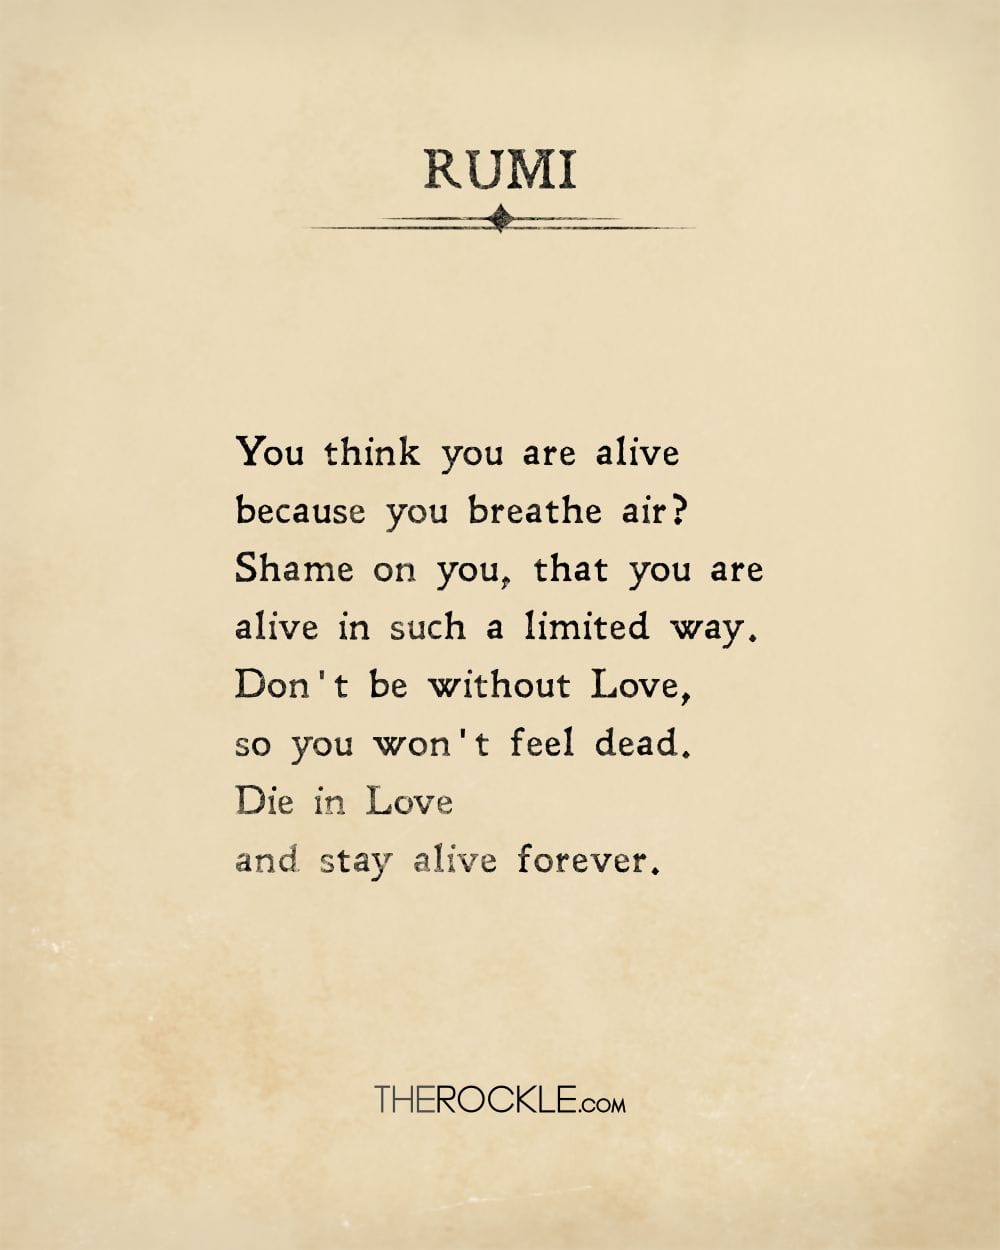 Rumi's quote about life and love